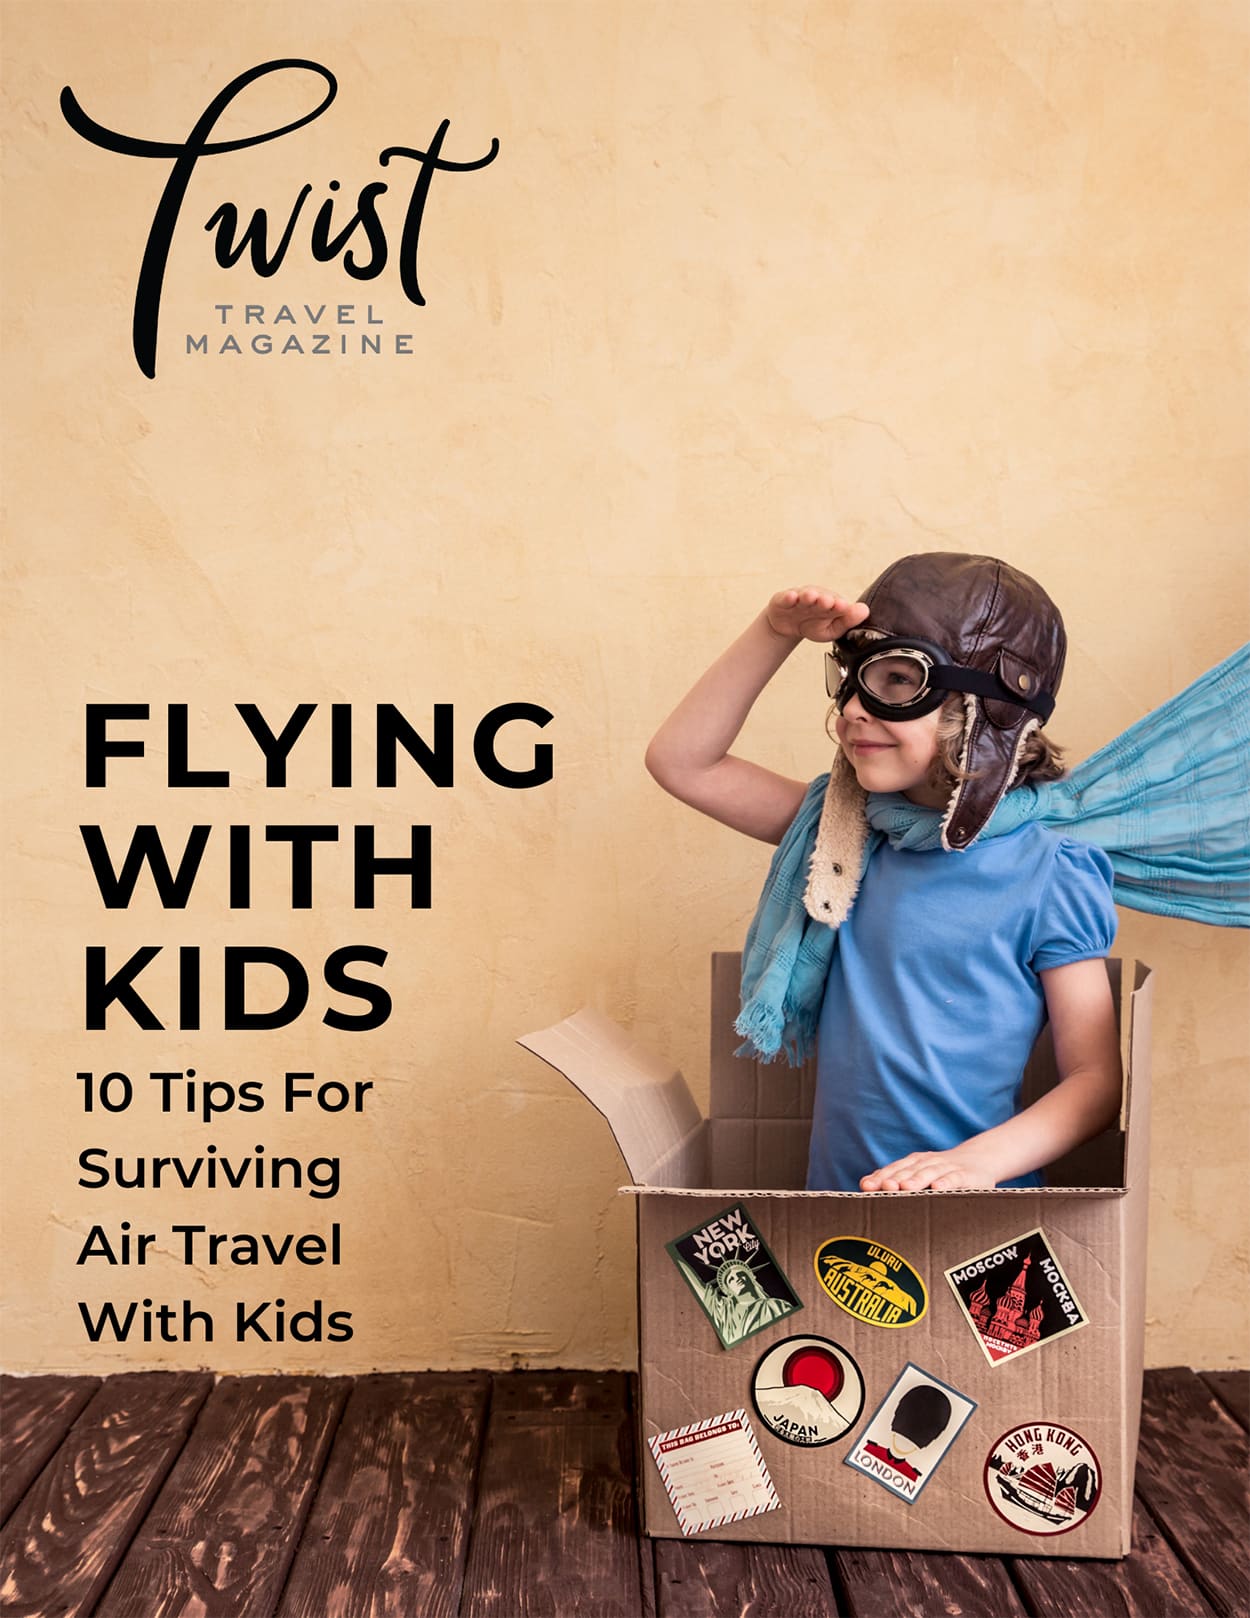 Twist Travel Magazine Guide to Flying with Kids